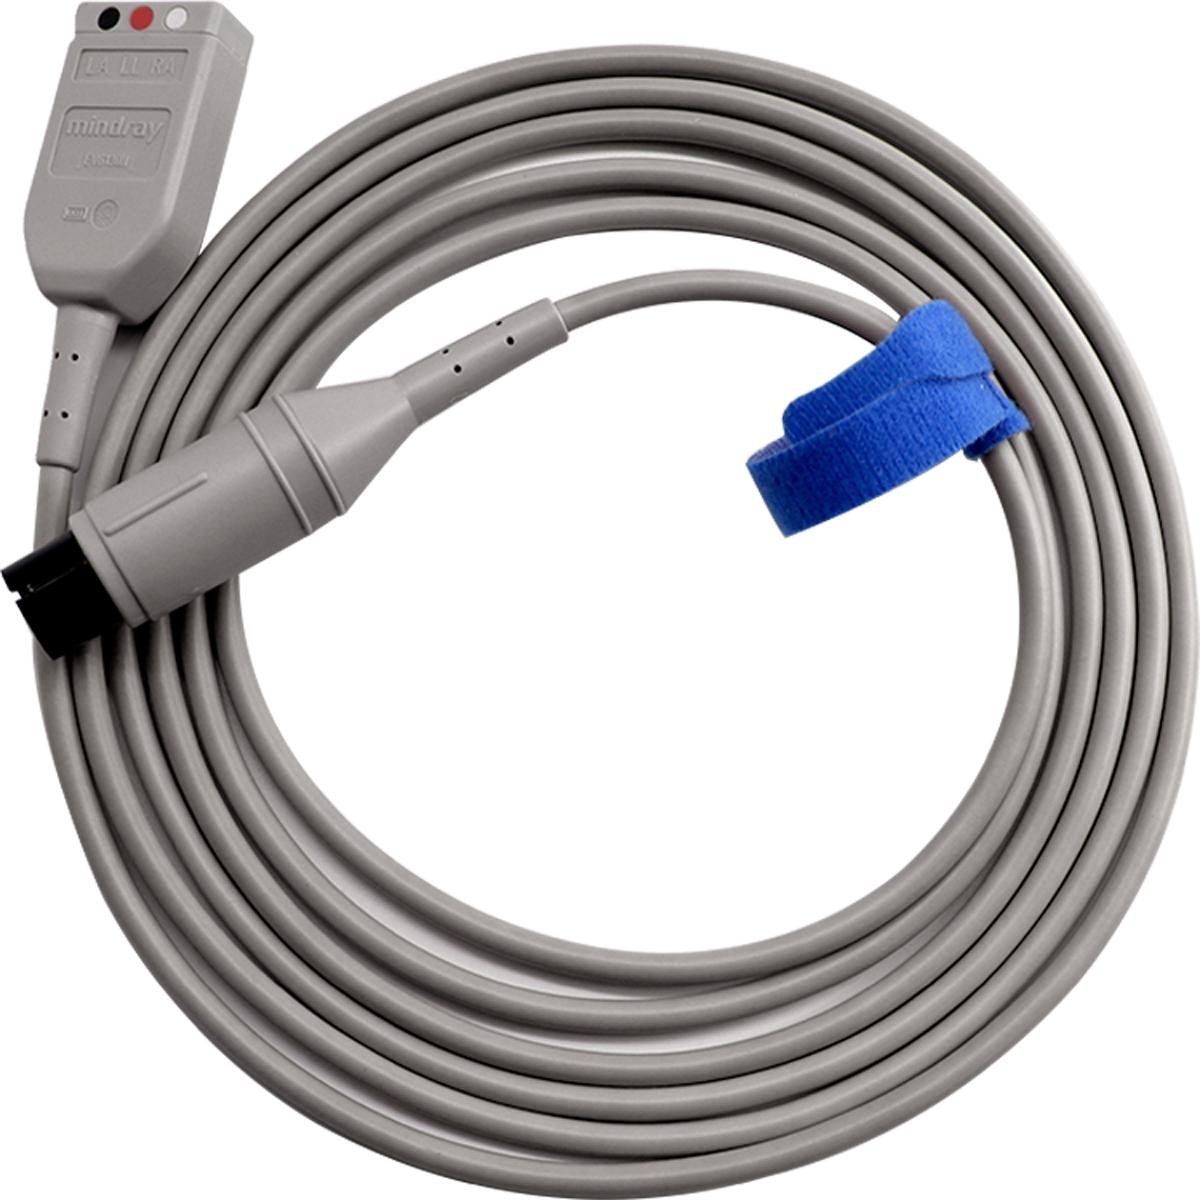 MINDRAY ecg cable low price 6 pins 3 cables EV6130N defibrillation